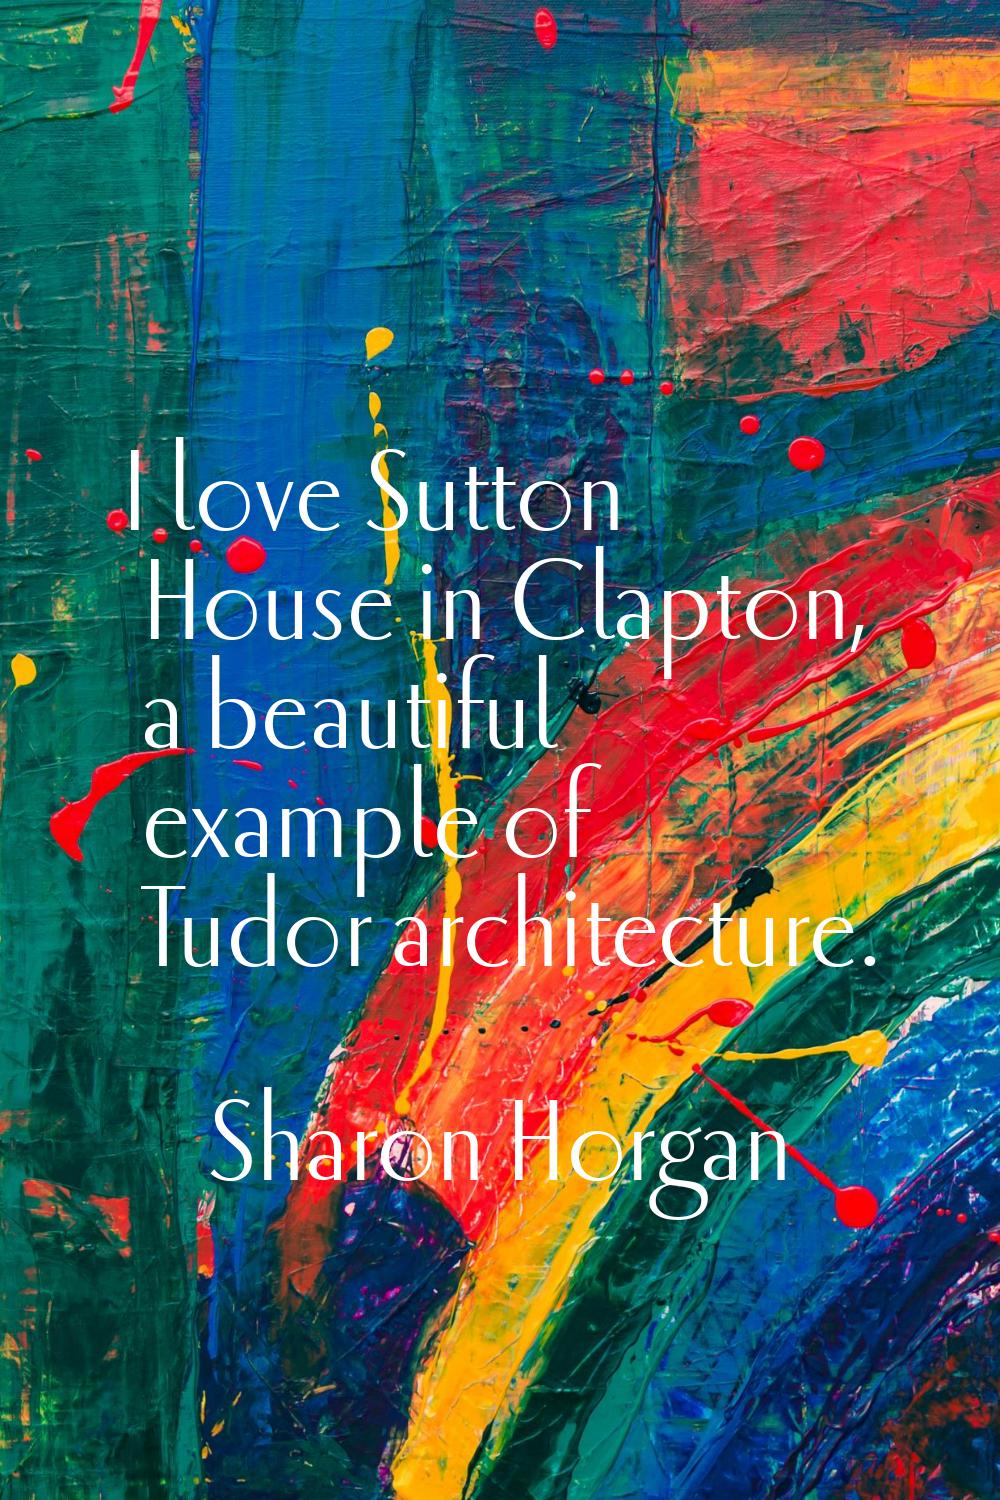 I love Sutton House in Clapton, a beautiful example of Tudor architecture.